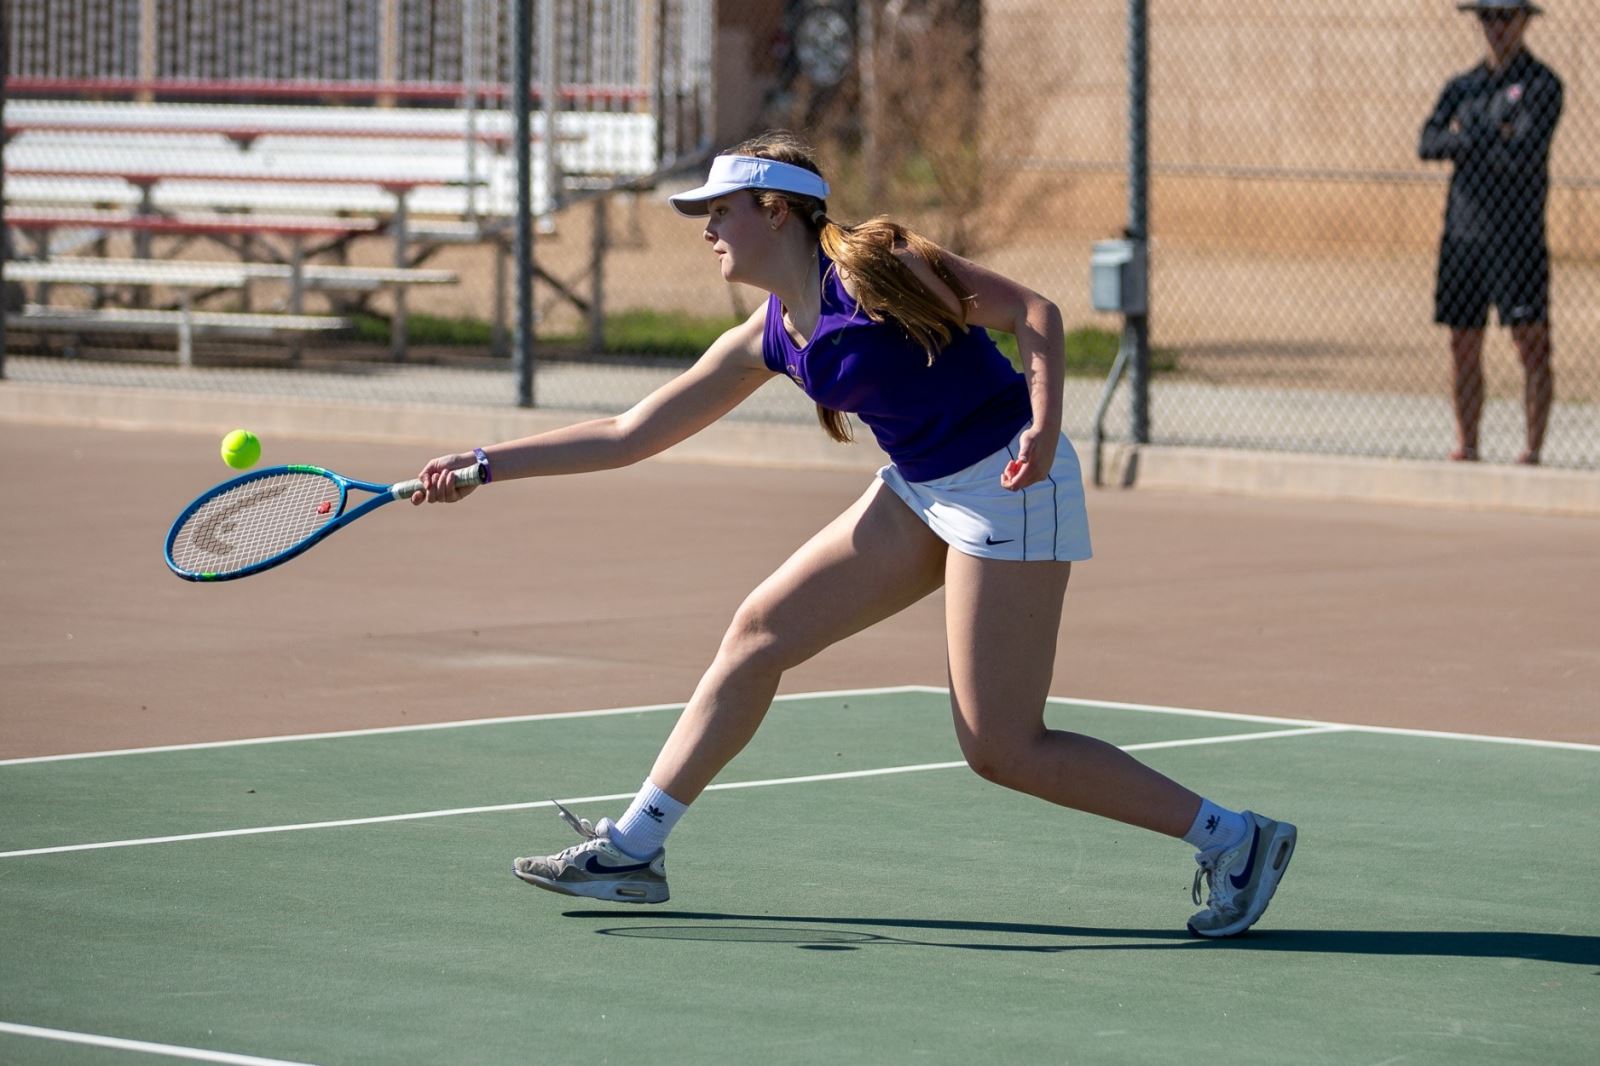 A Sabino girls tennis player aims her racquet low to hit the ball.